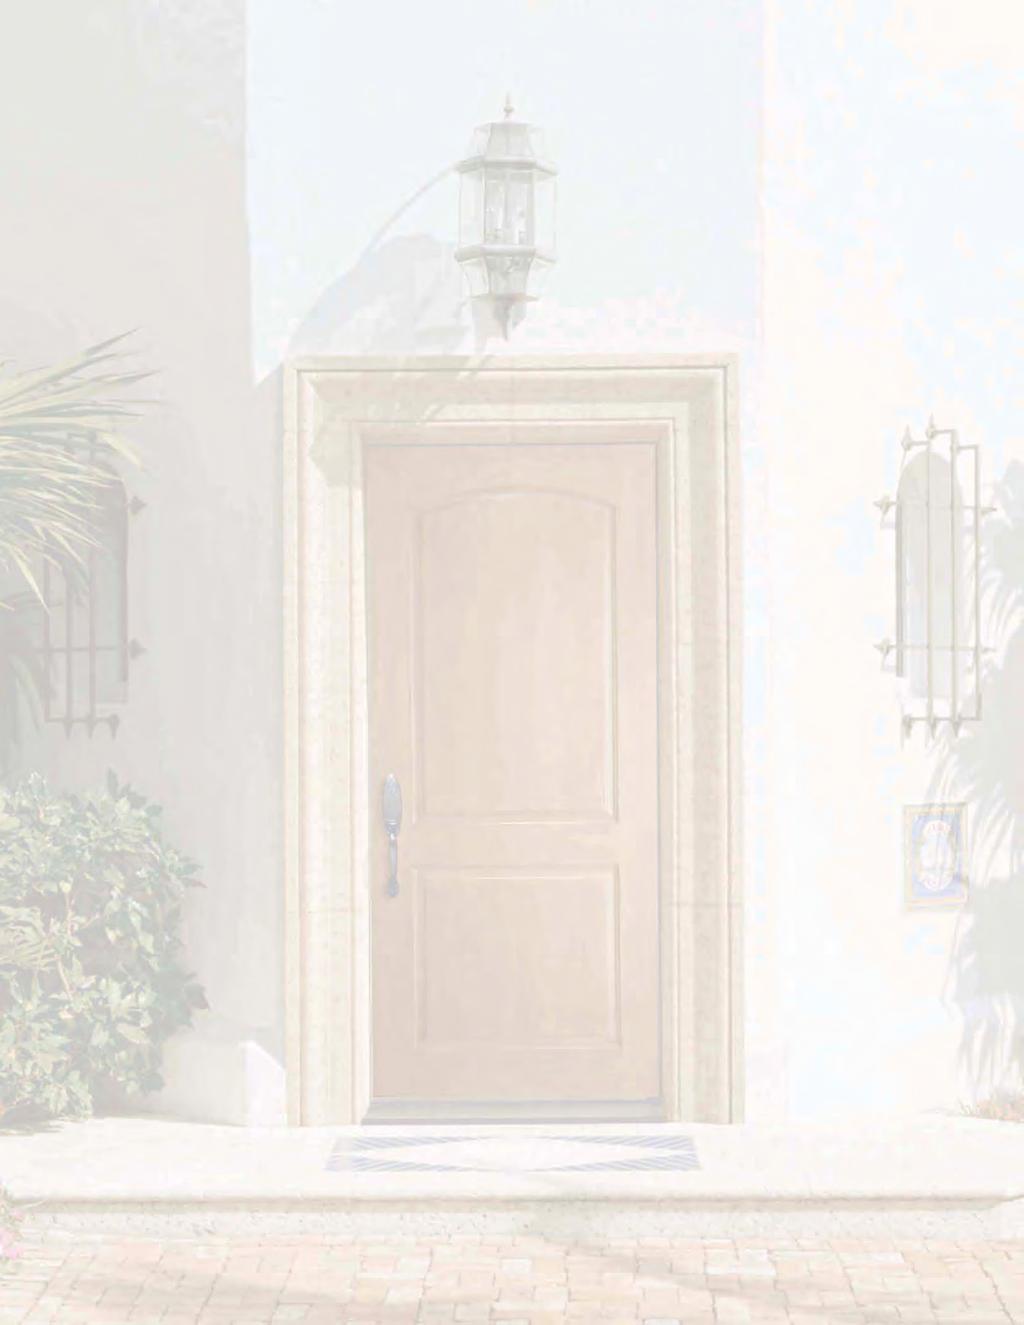 Introducing the new Barrington Craftsman & Sierra Fiberglass Entry Doors from Masonite The Series has been engineered to meet the design needs of Southwest, Spanish or Mediterranean style homes.